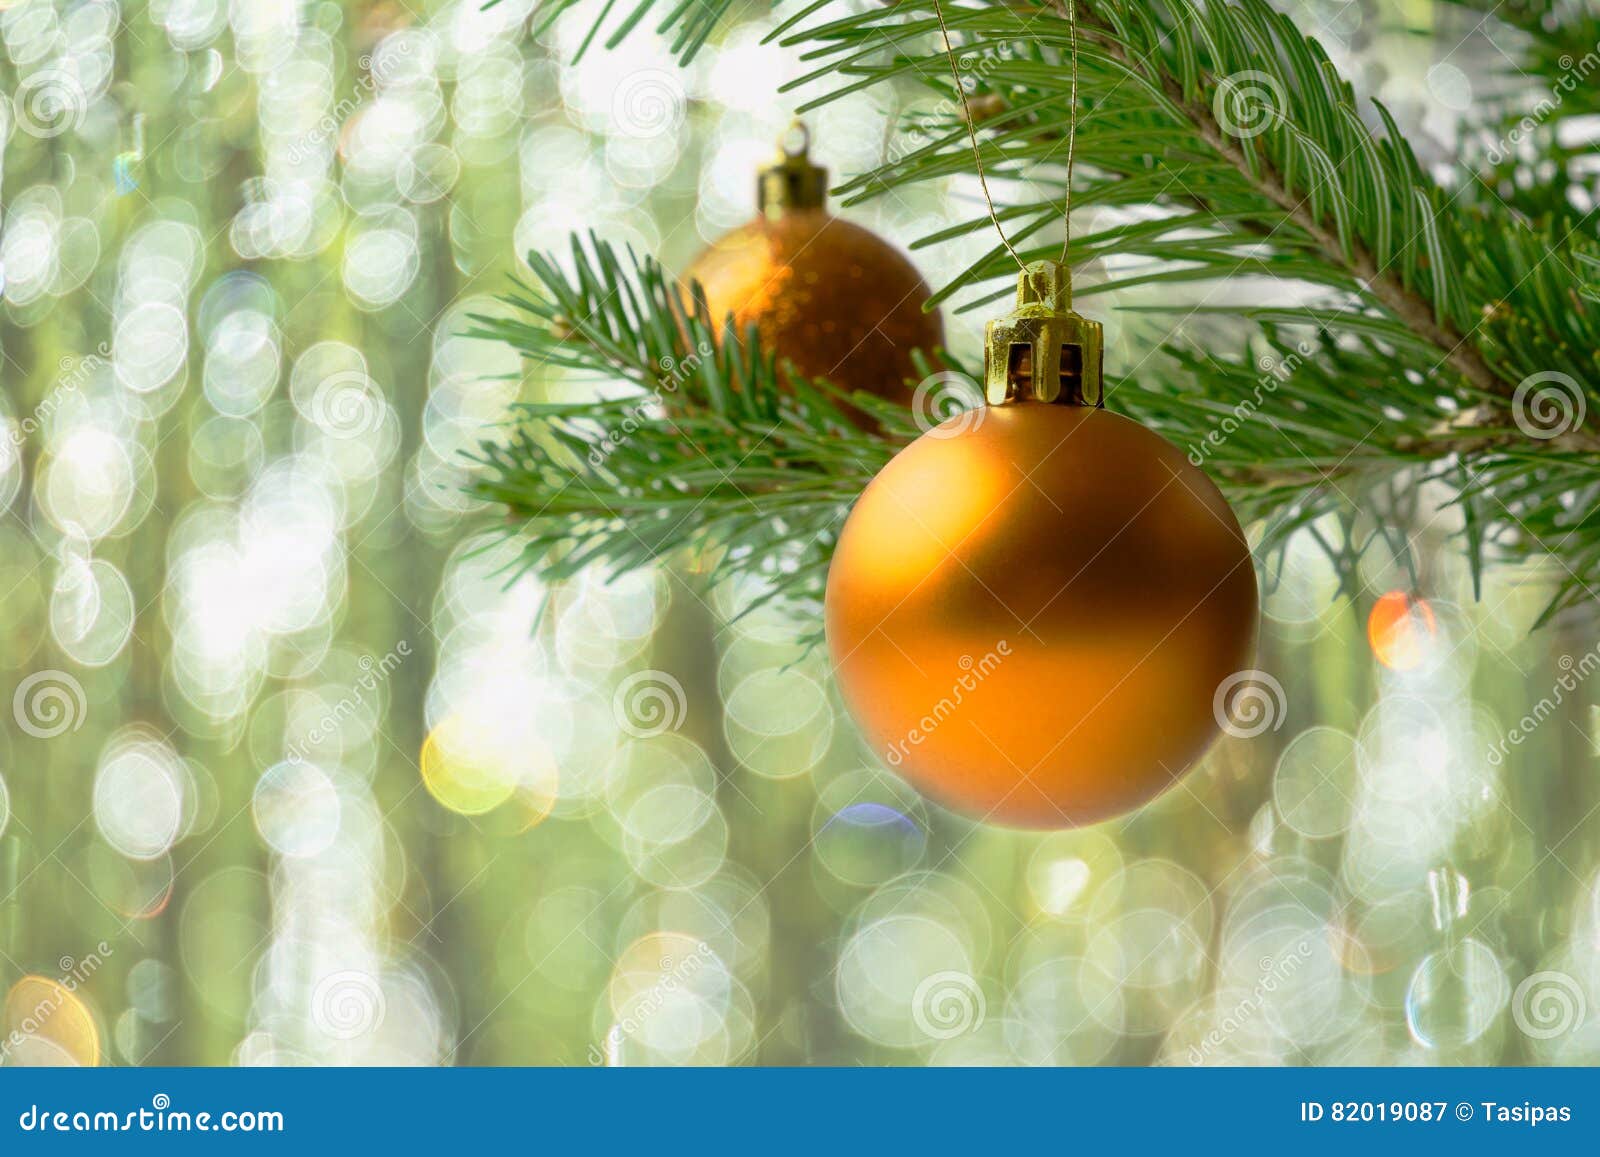 Christmas Tree Branch with Golden Balls Stock Image - Image of elegance ...